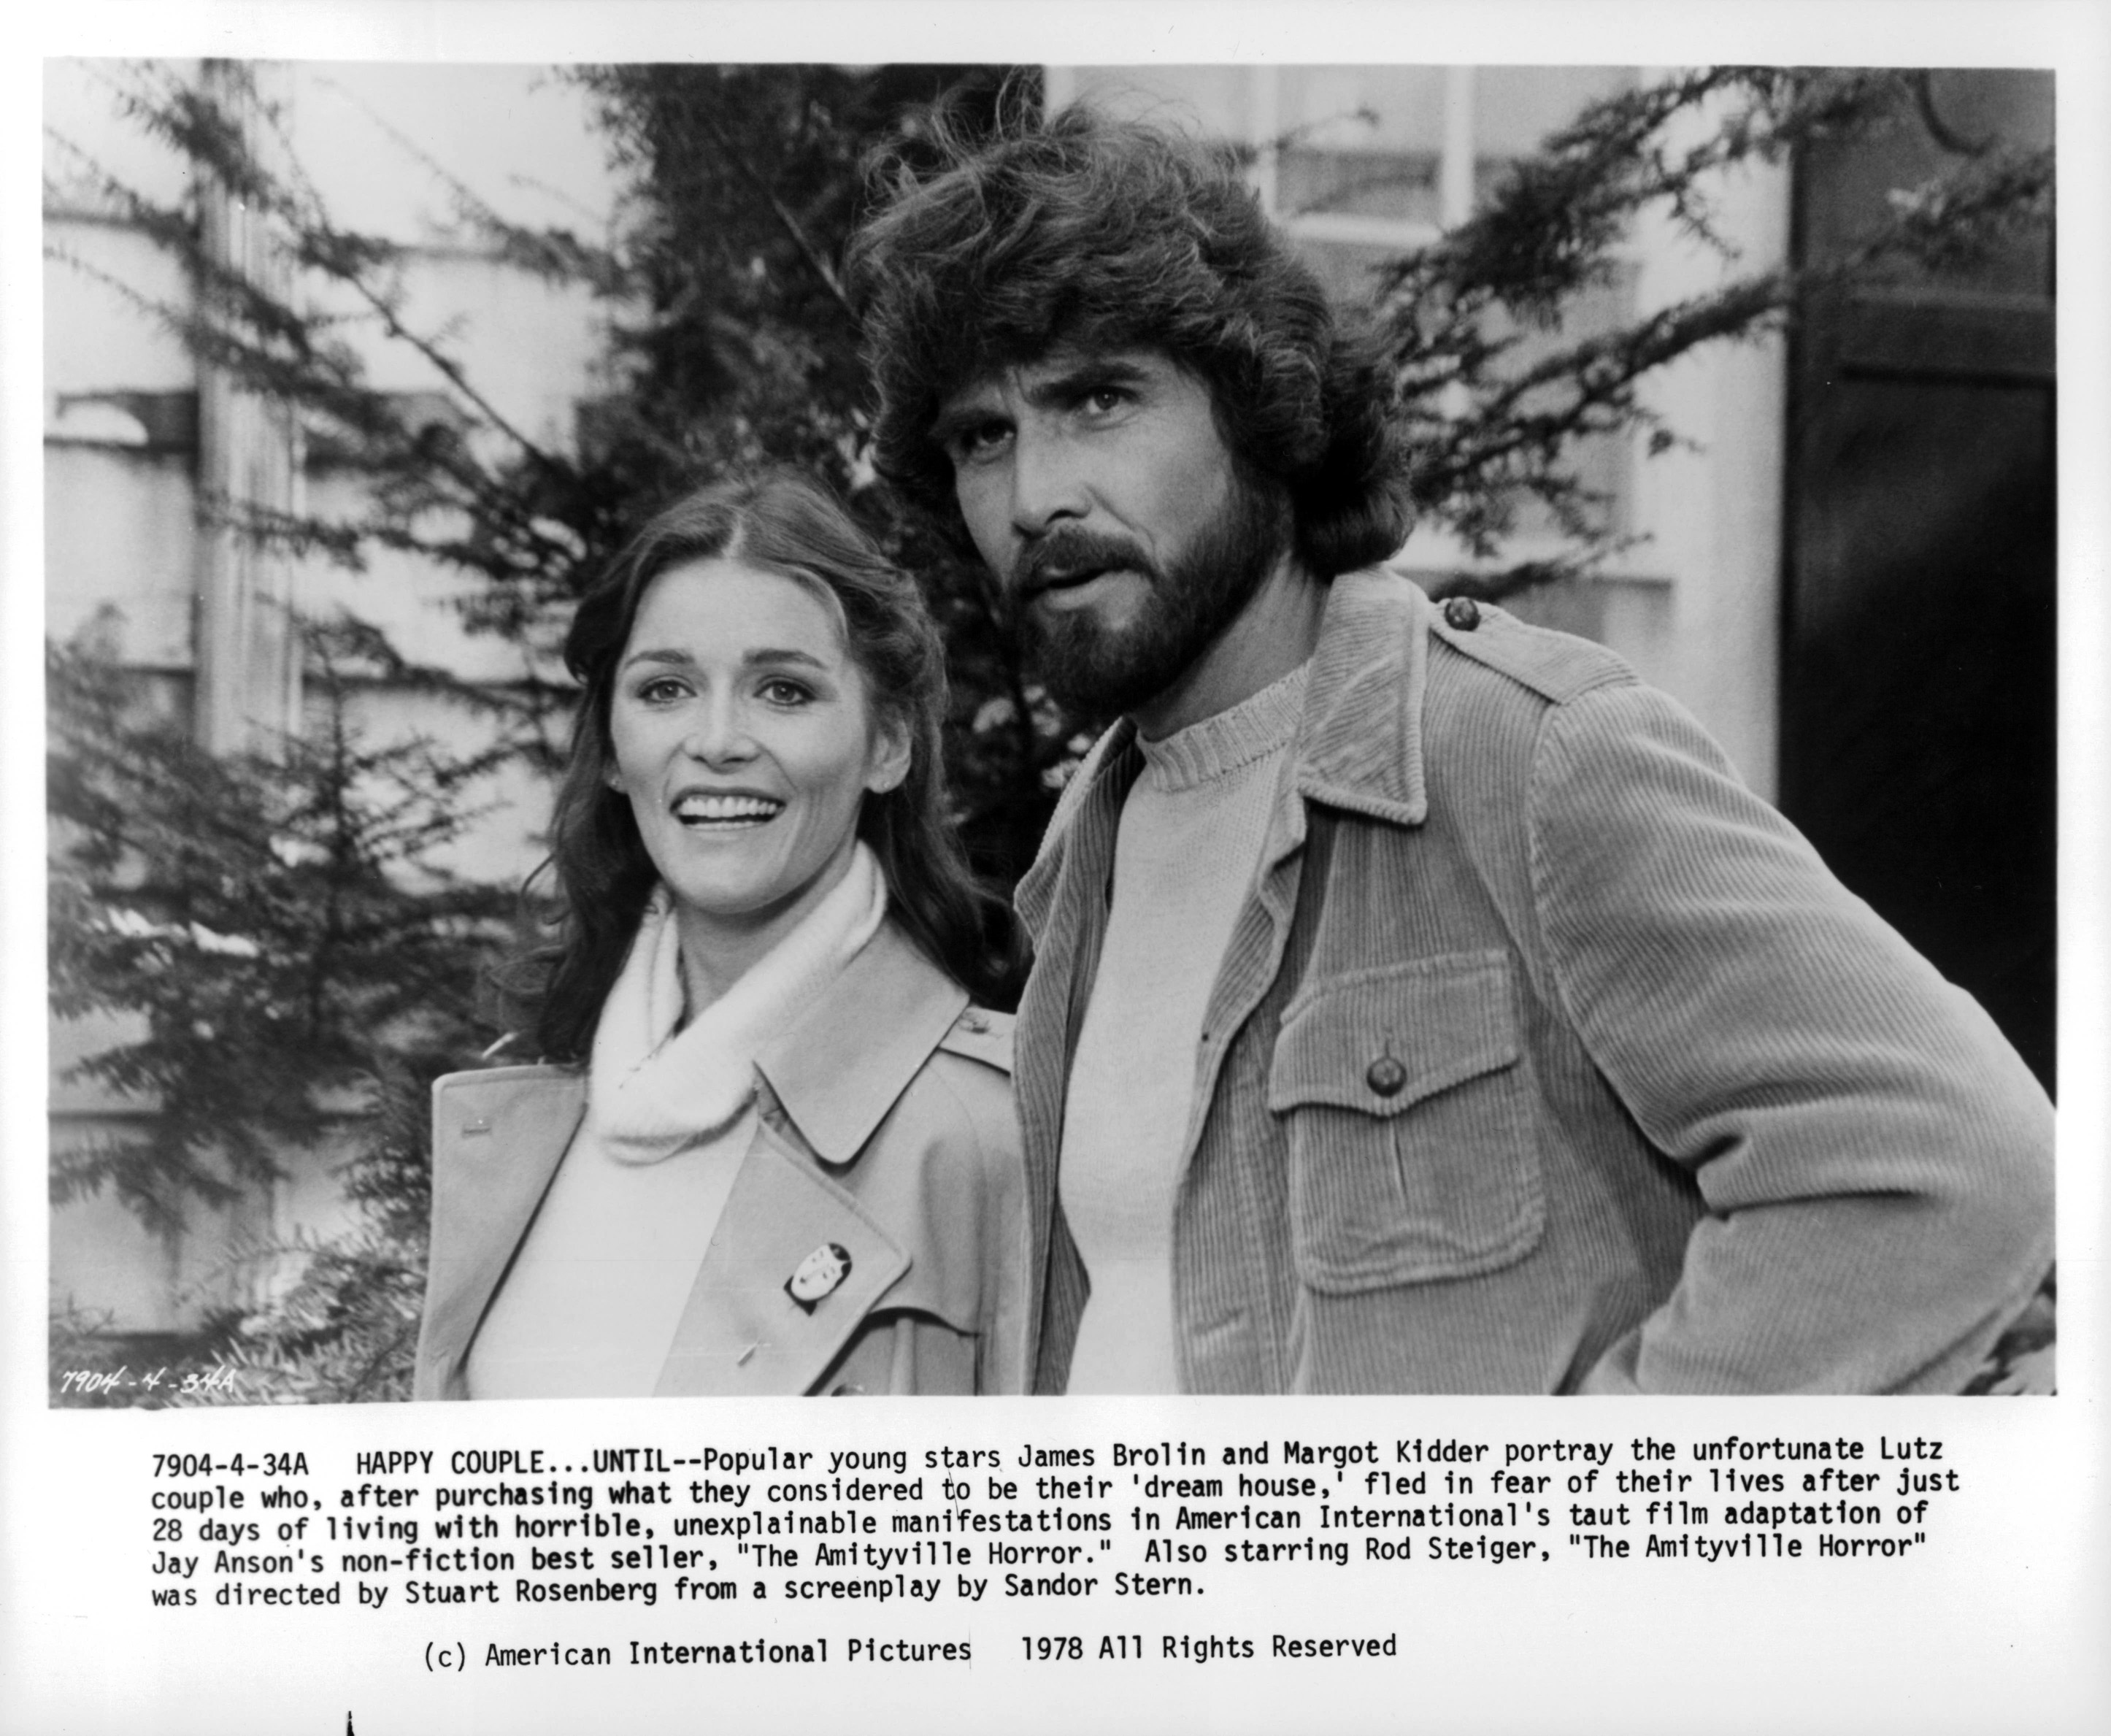 Margot Kidder and James Brolin on the set of 'The Amityville Horror.'